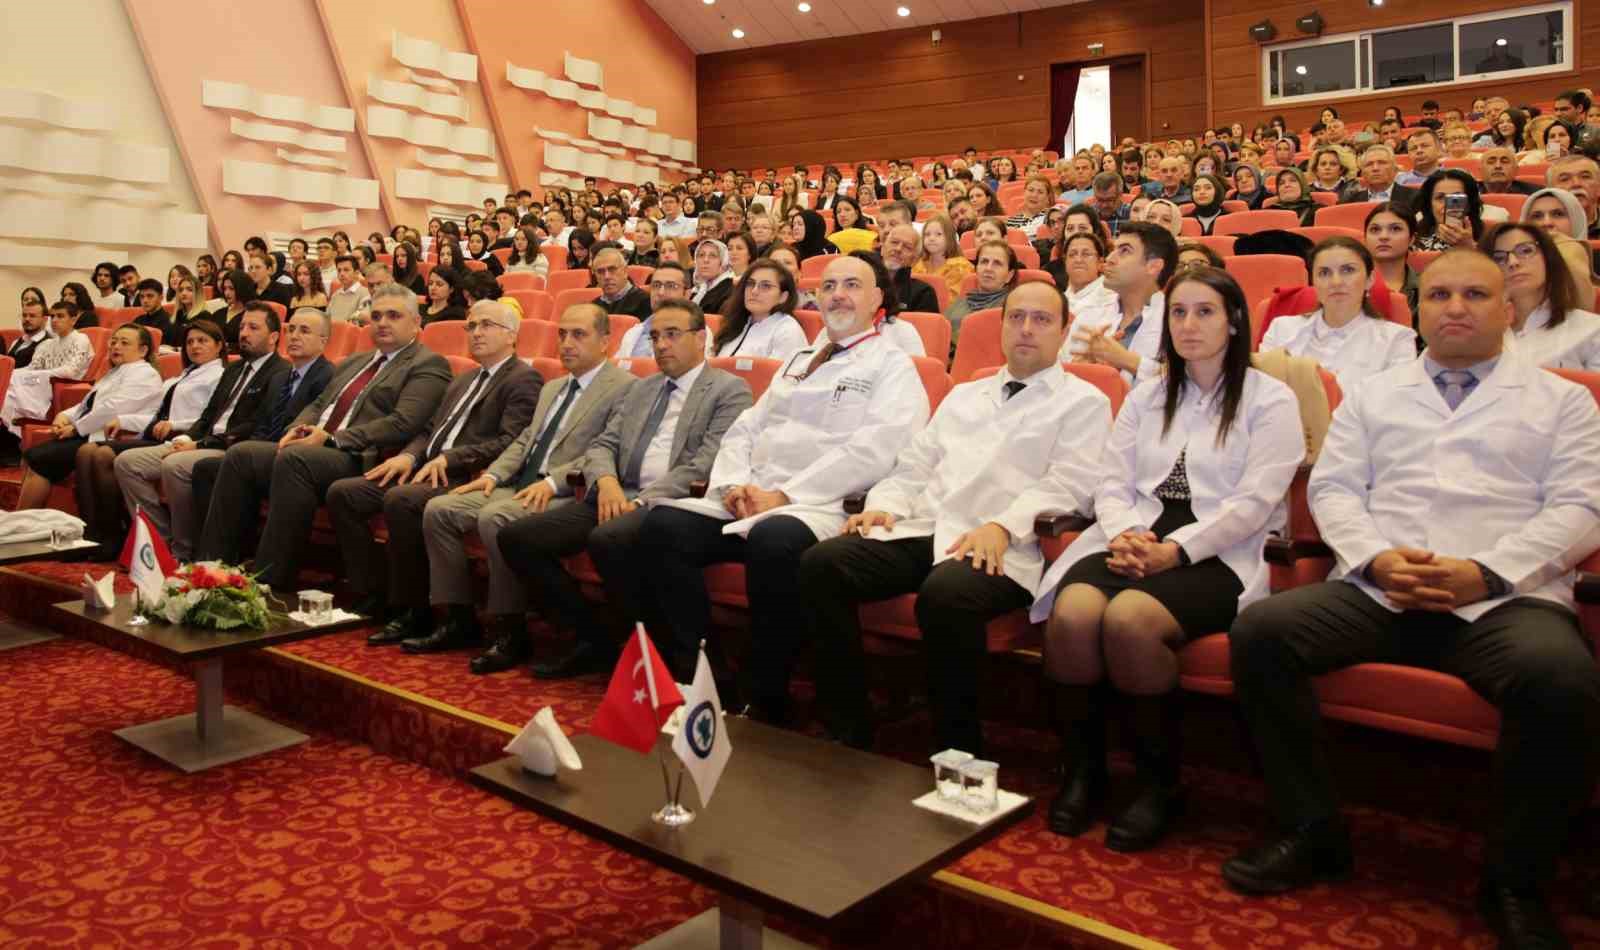 The young dental candidates of the ESOGÜ wore the white coat
